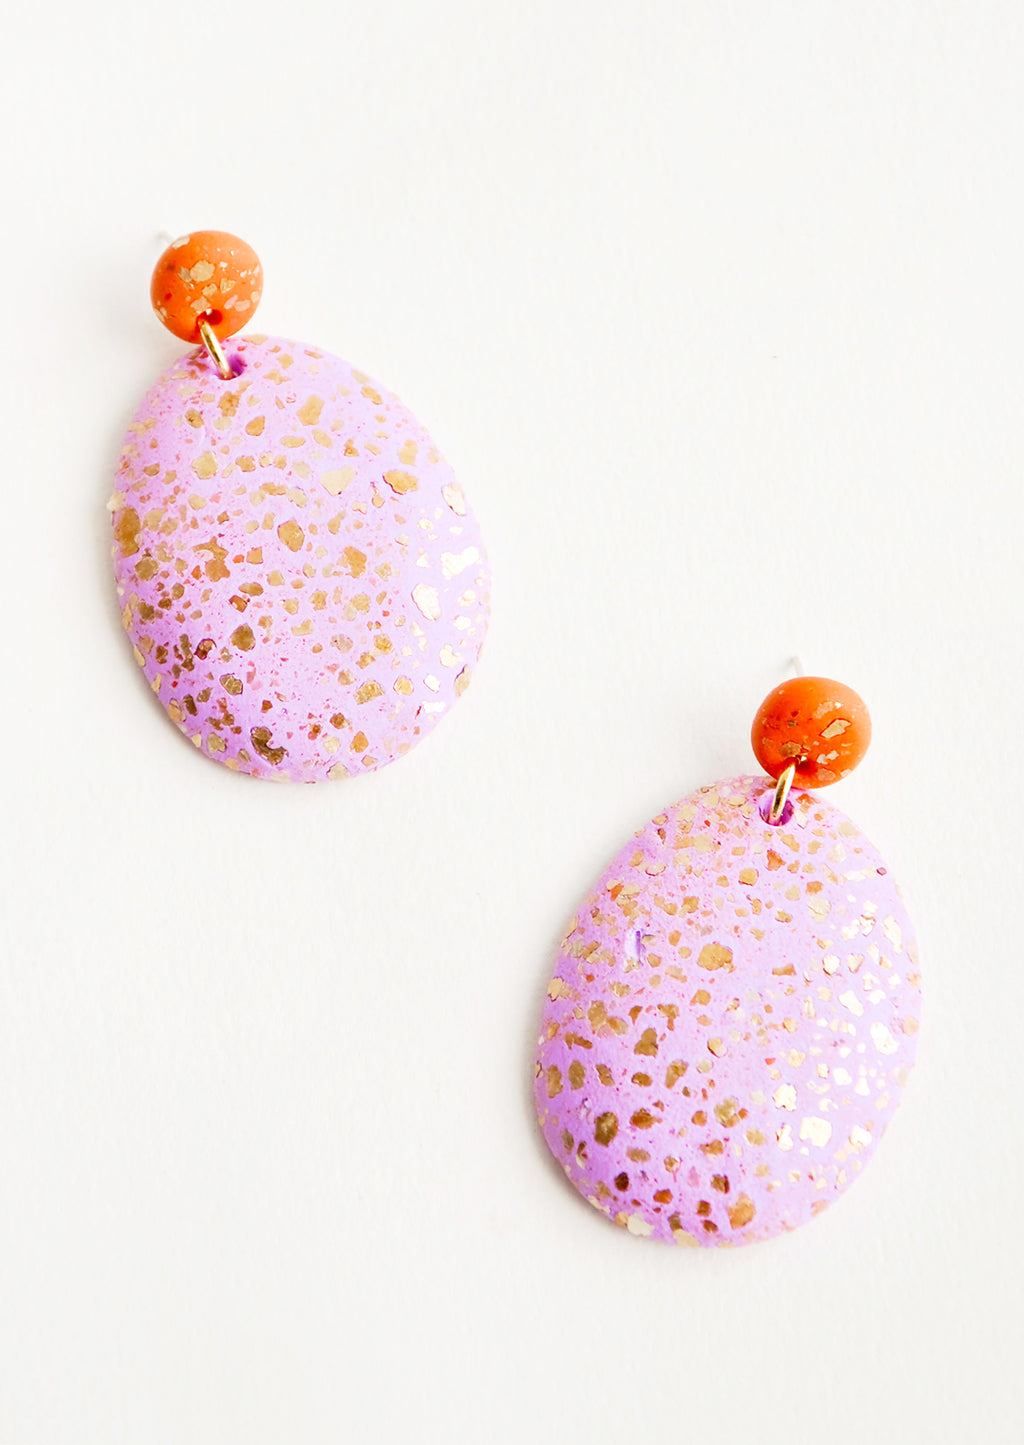 Orchid / Terracotta: Dangling glitter covered earrings, with a pink larger oval dangling from a small red bead.